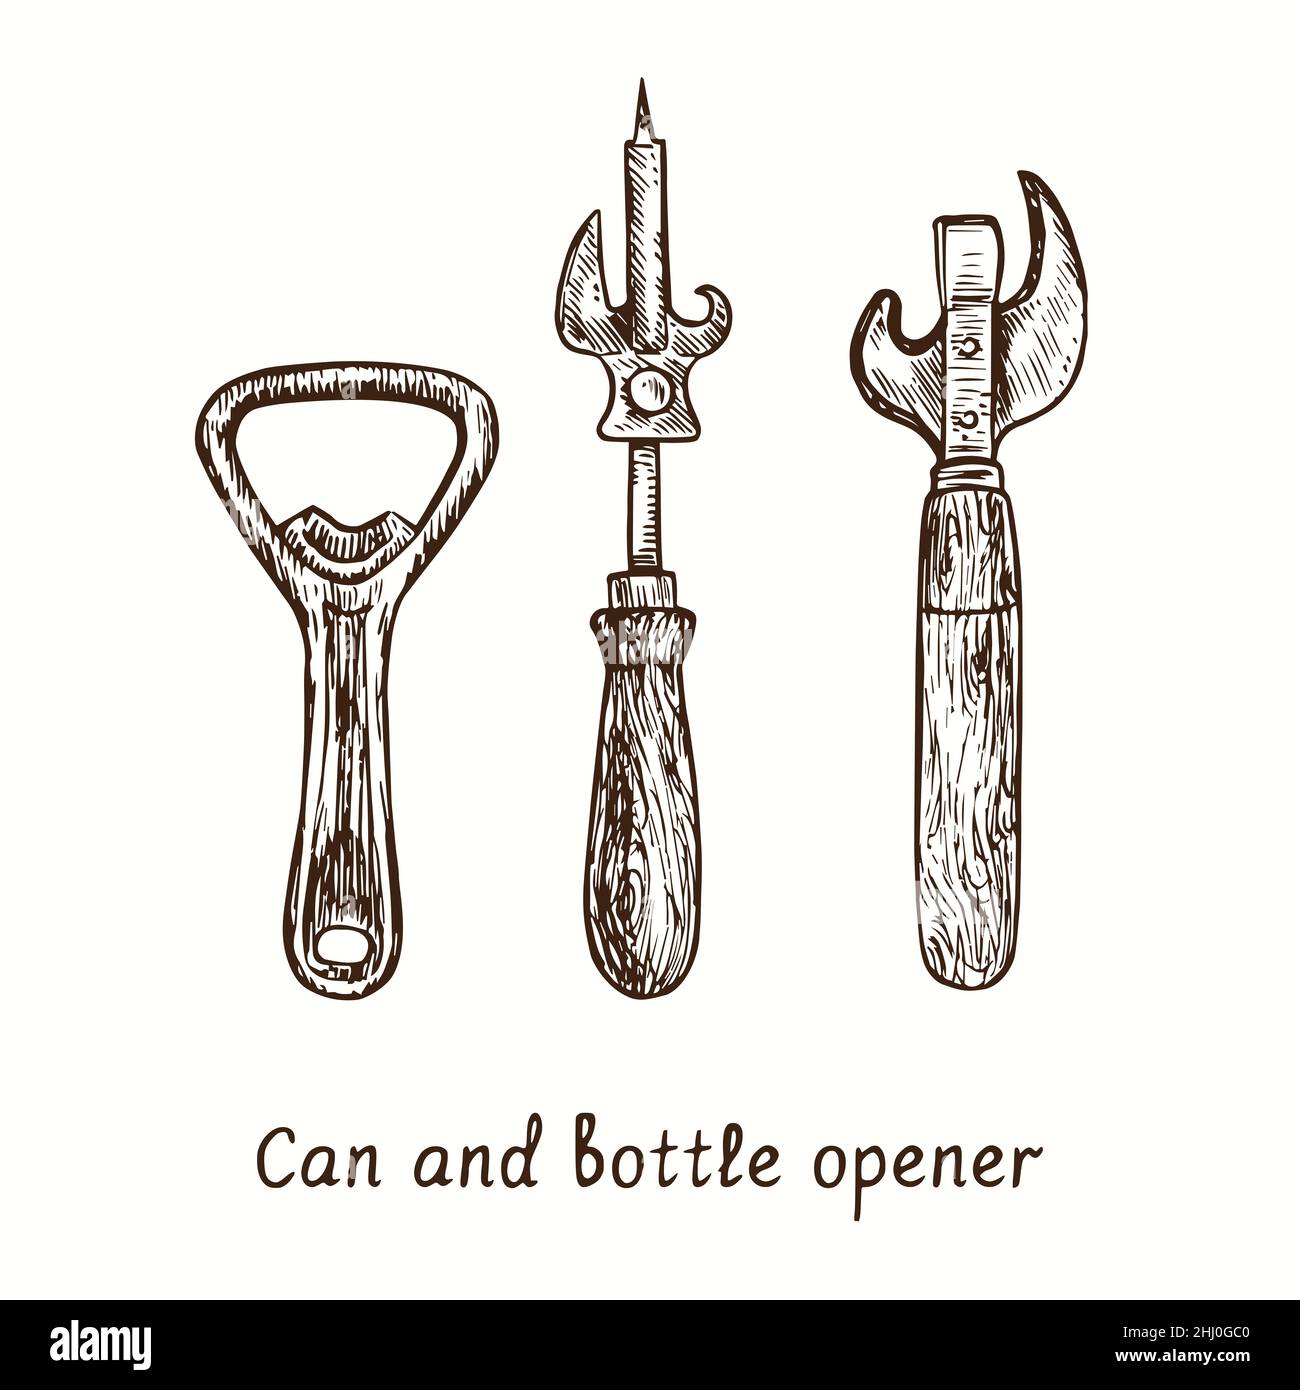 Can and bottle opener collection. Ink black and white doodle drawing in woodcut style. Stock Photo